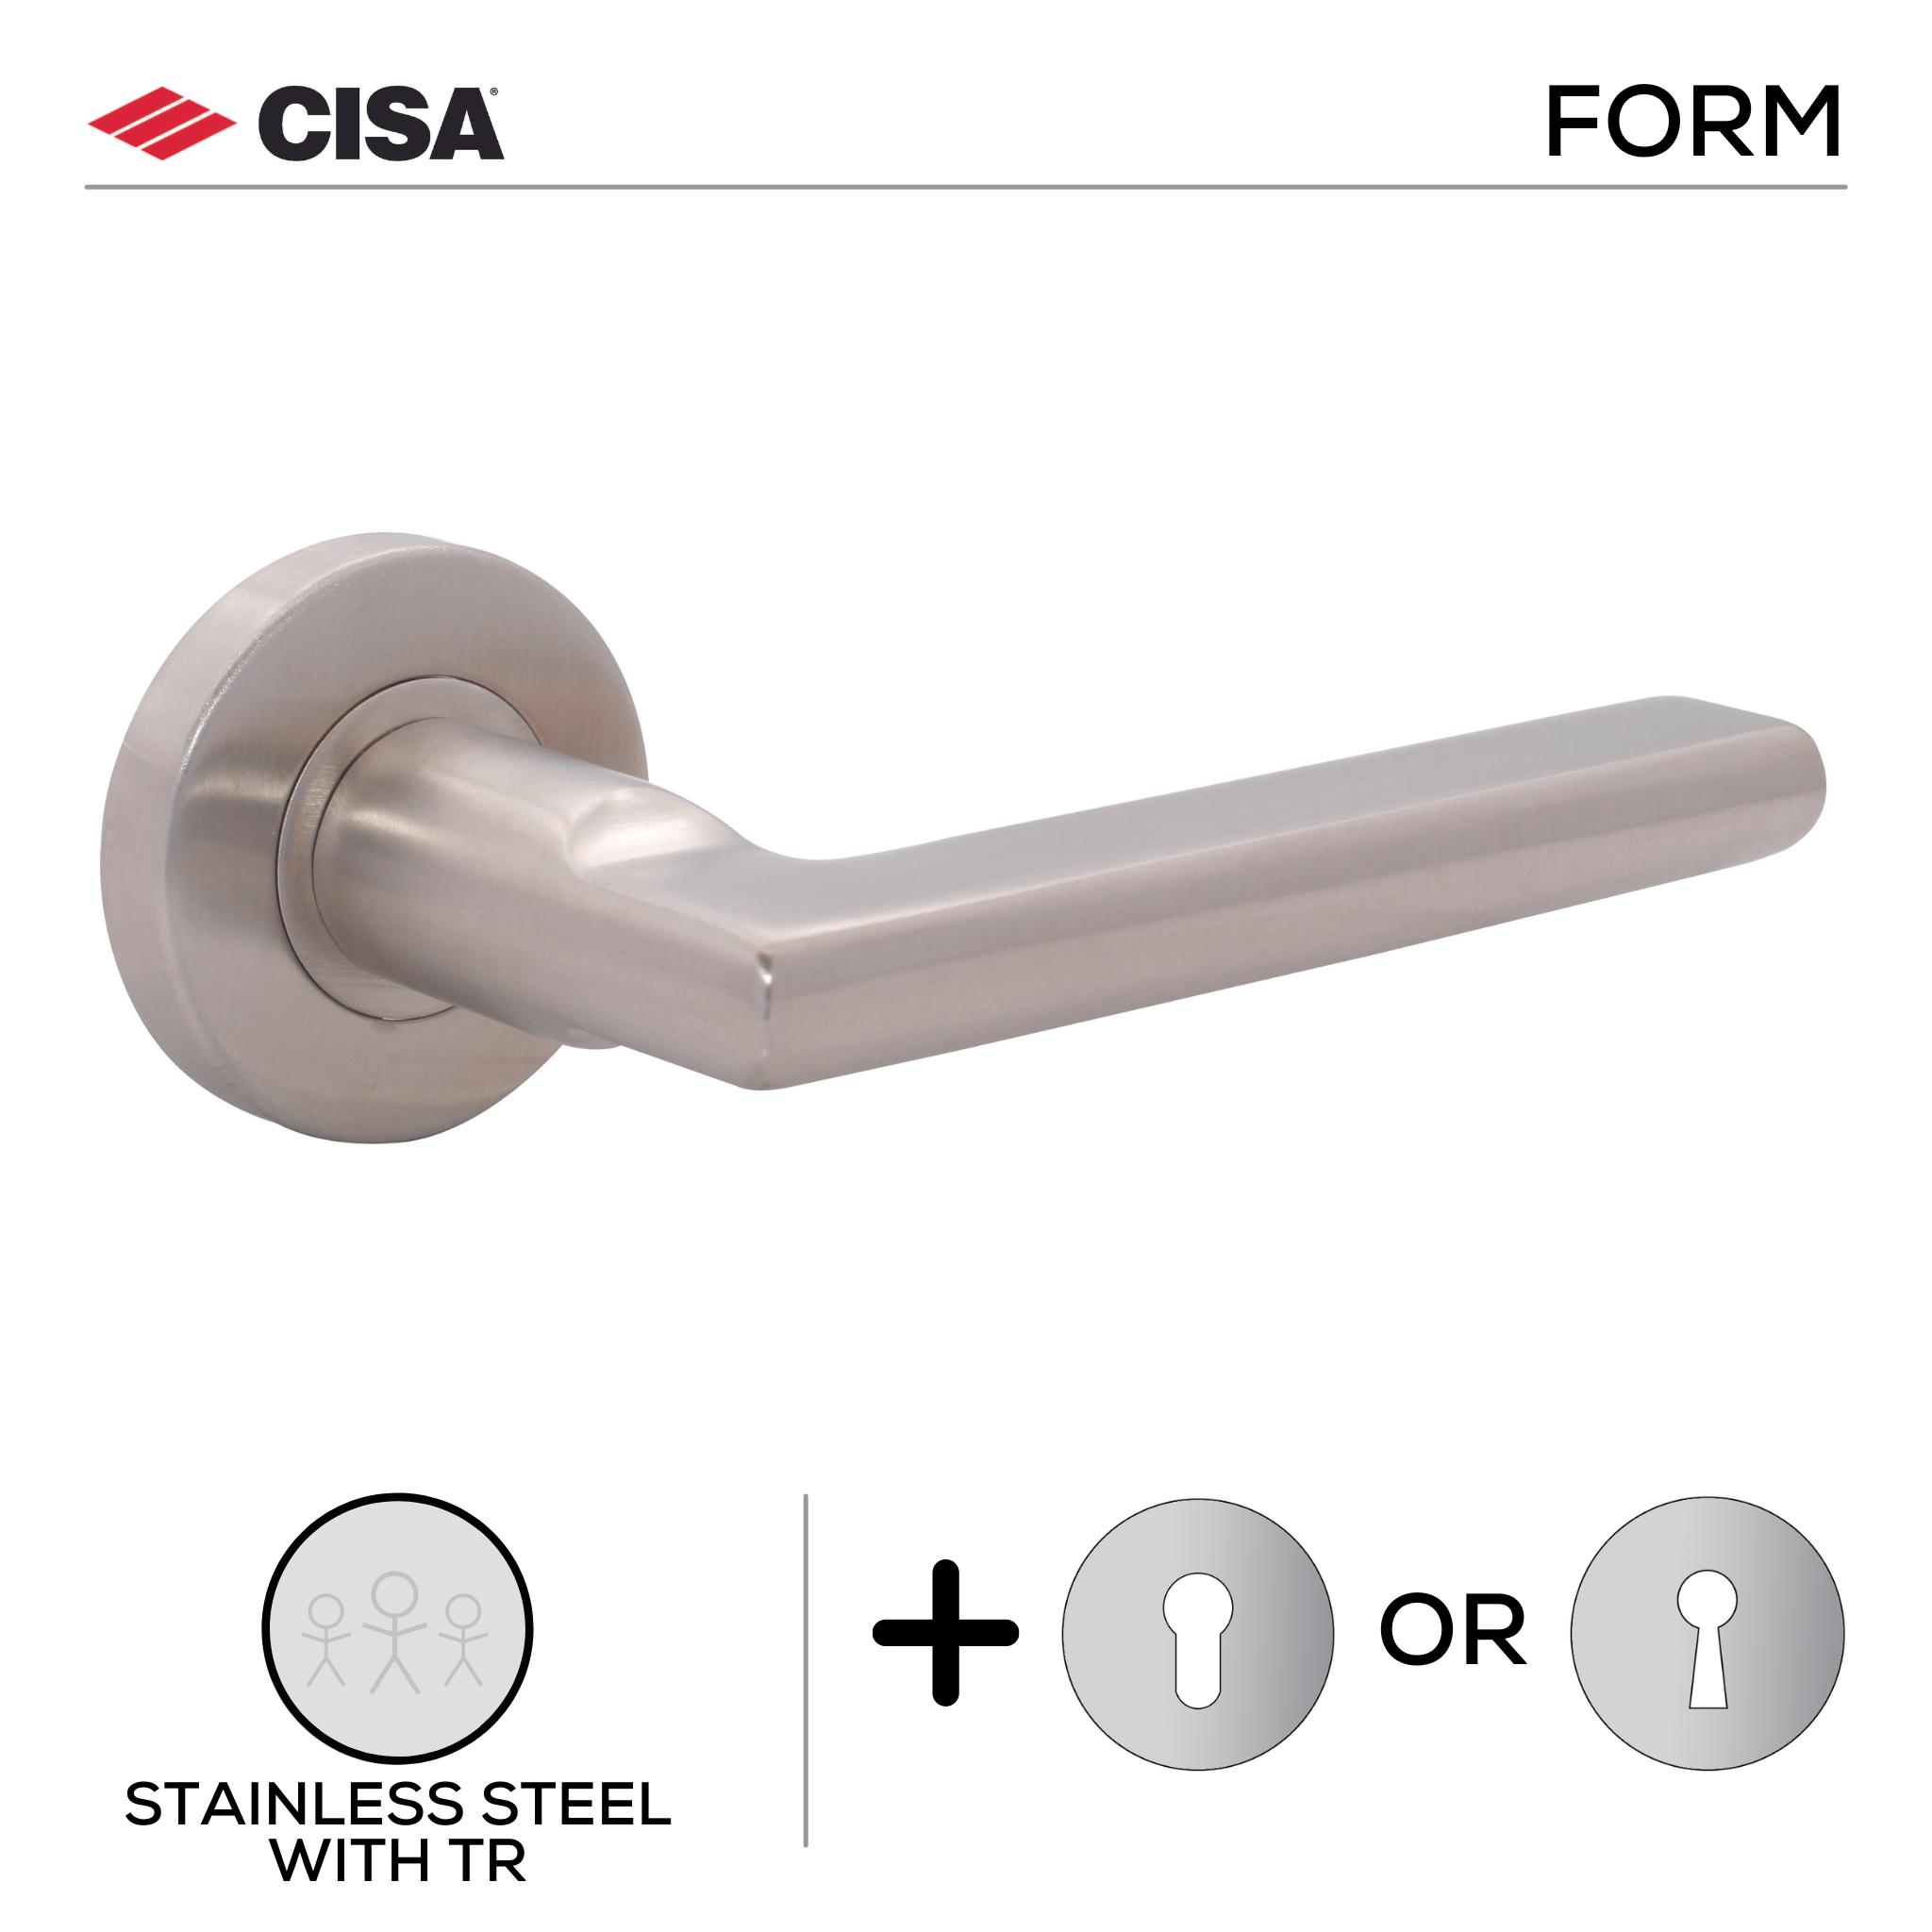 FS106.R._.TR, Lever Handles, Form, On Round Rose, With Escutcheons, 134mm (l), Stainless Steel with Tarnish Resistant, CISA